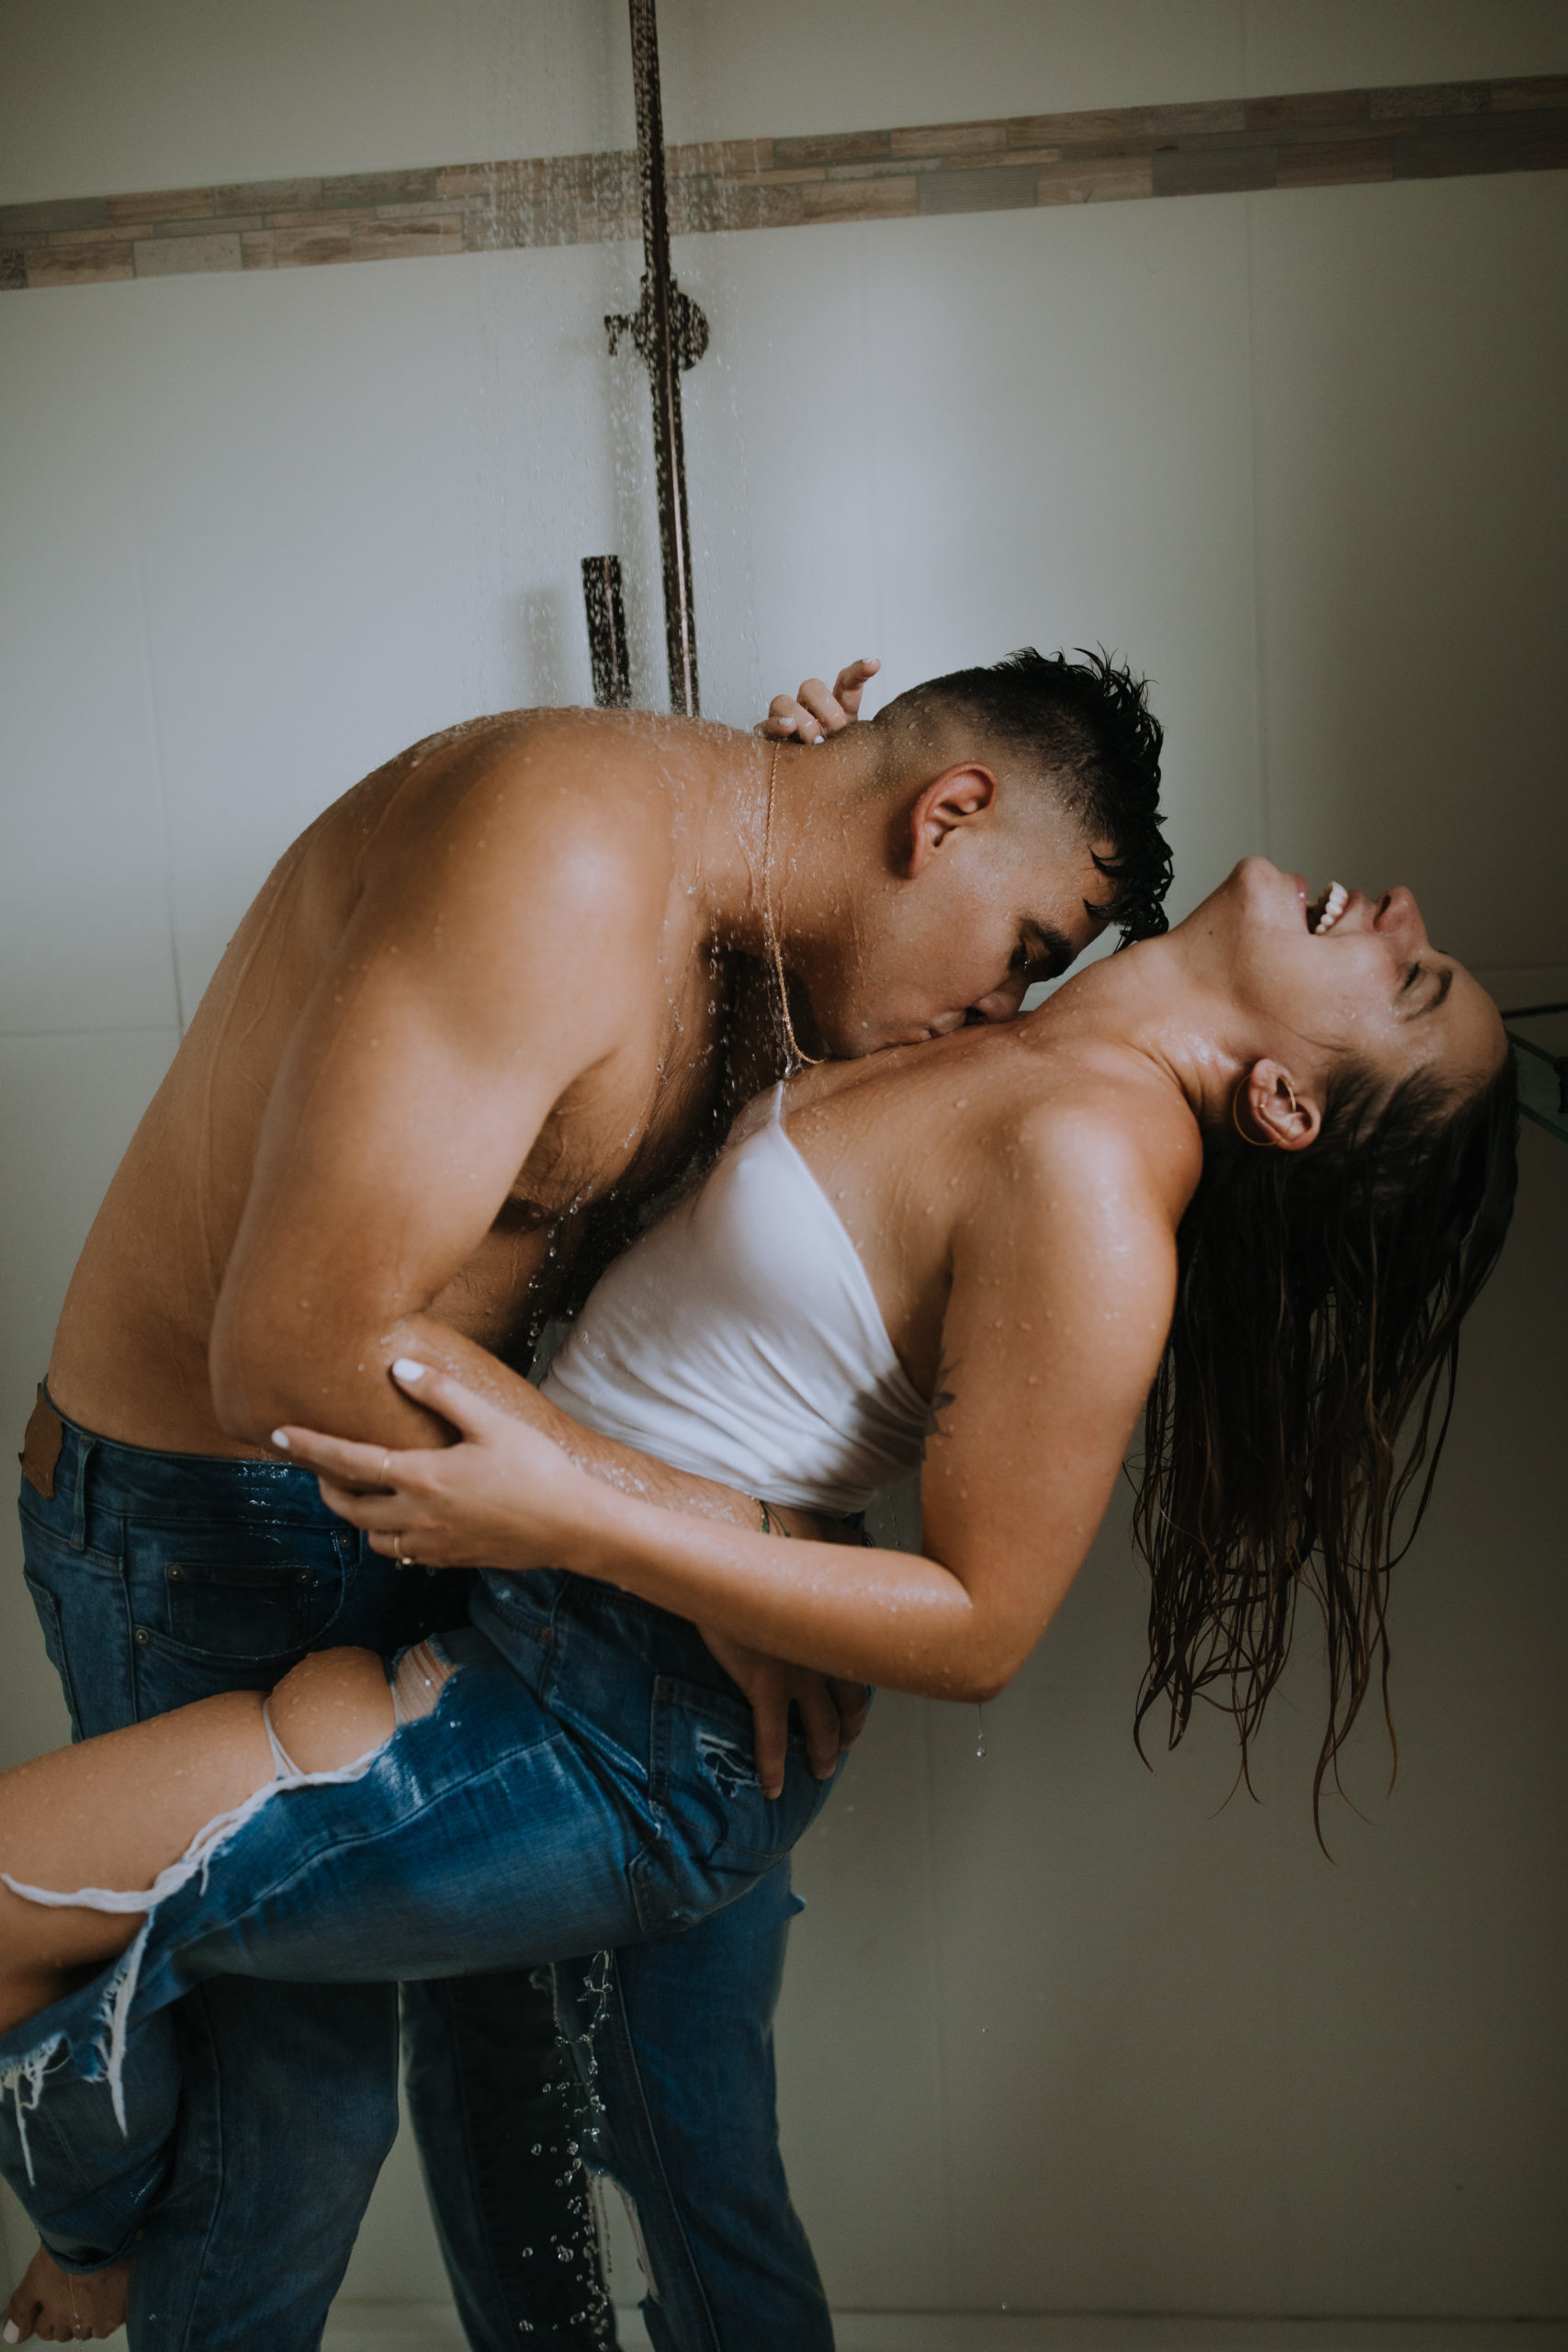 Grunge couple in shower with their clothes on for some steamy photos